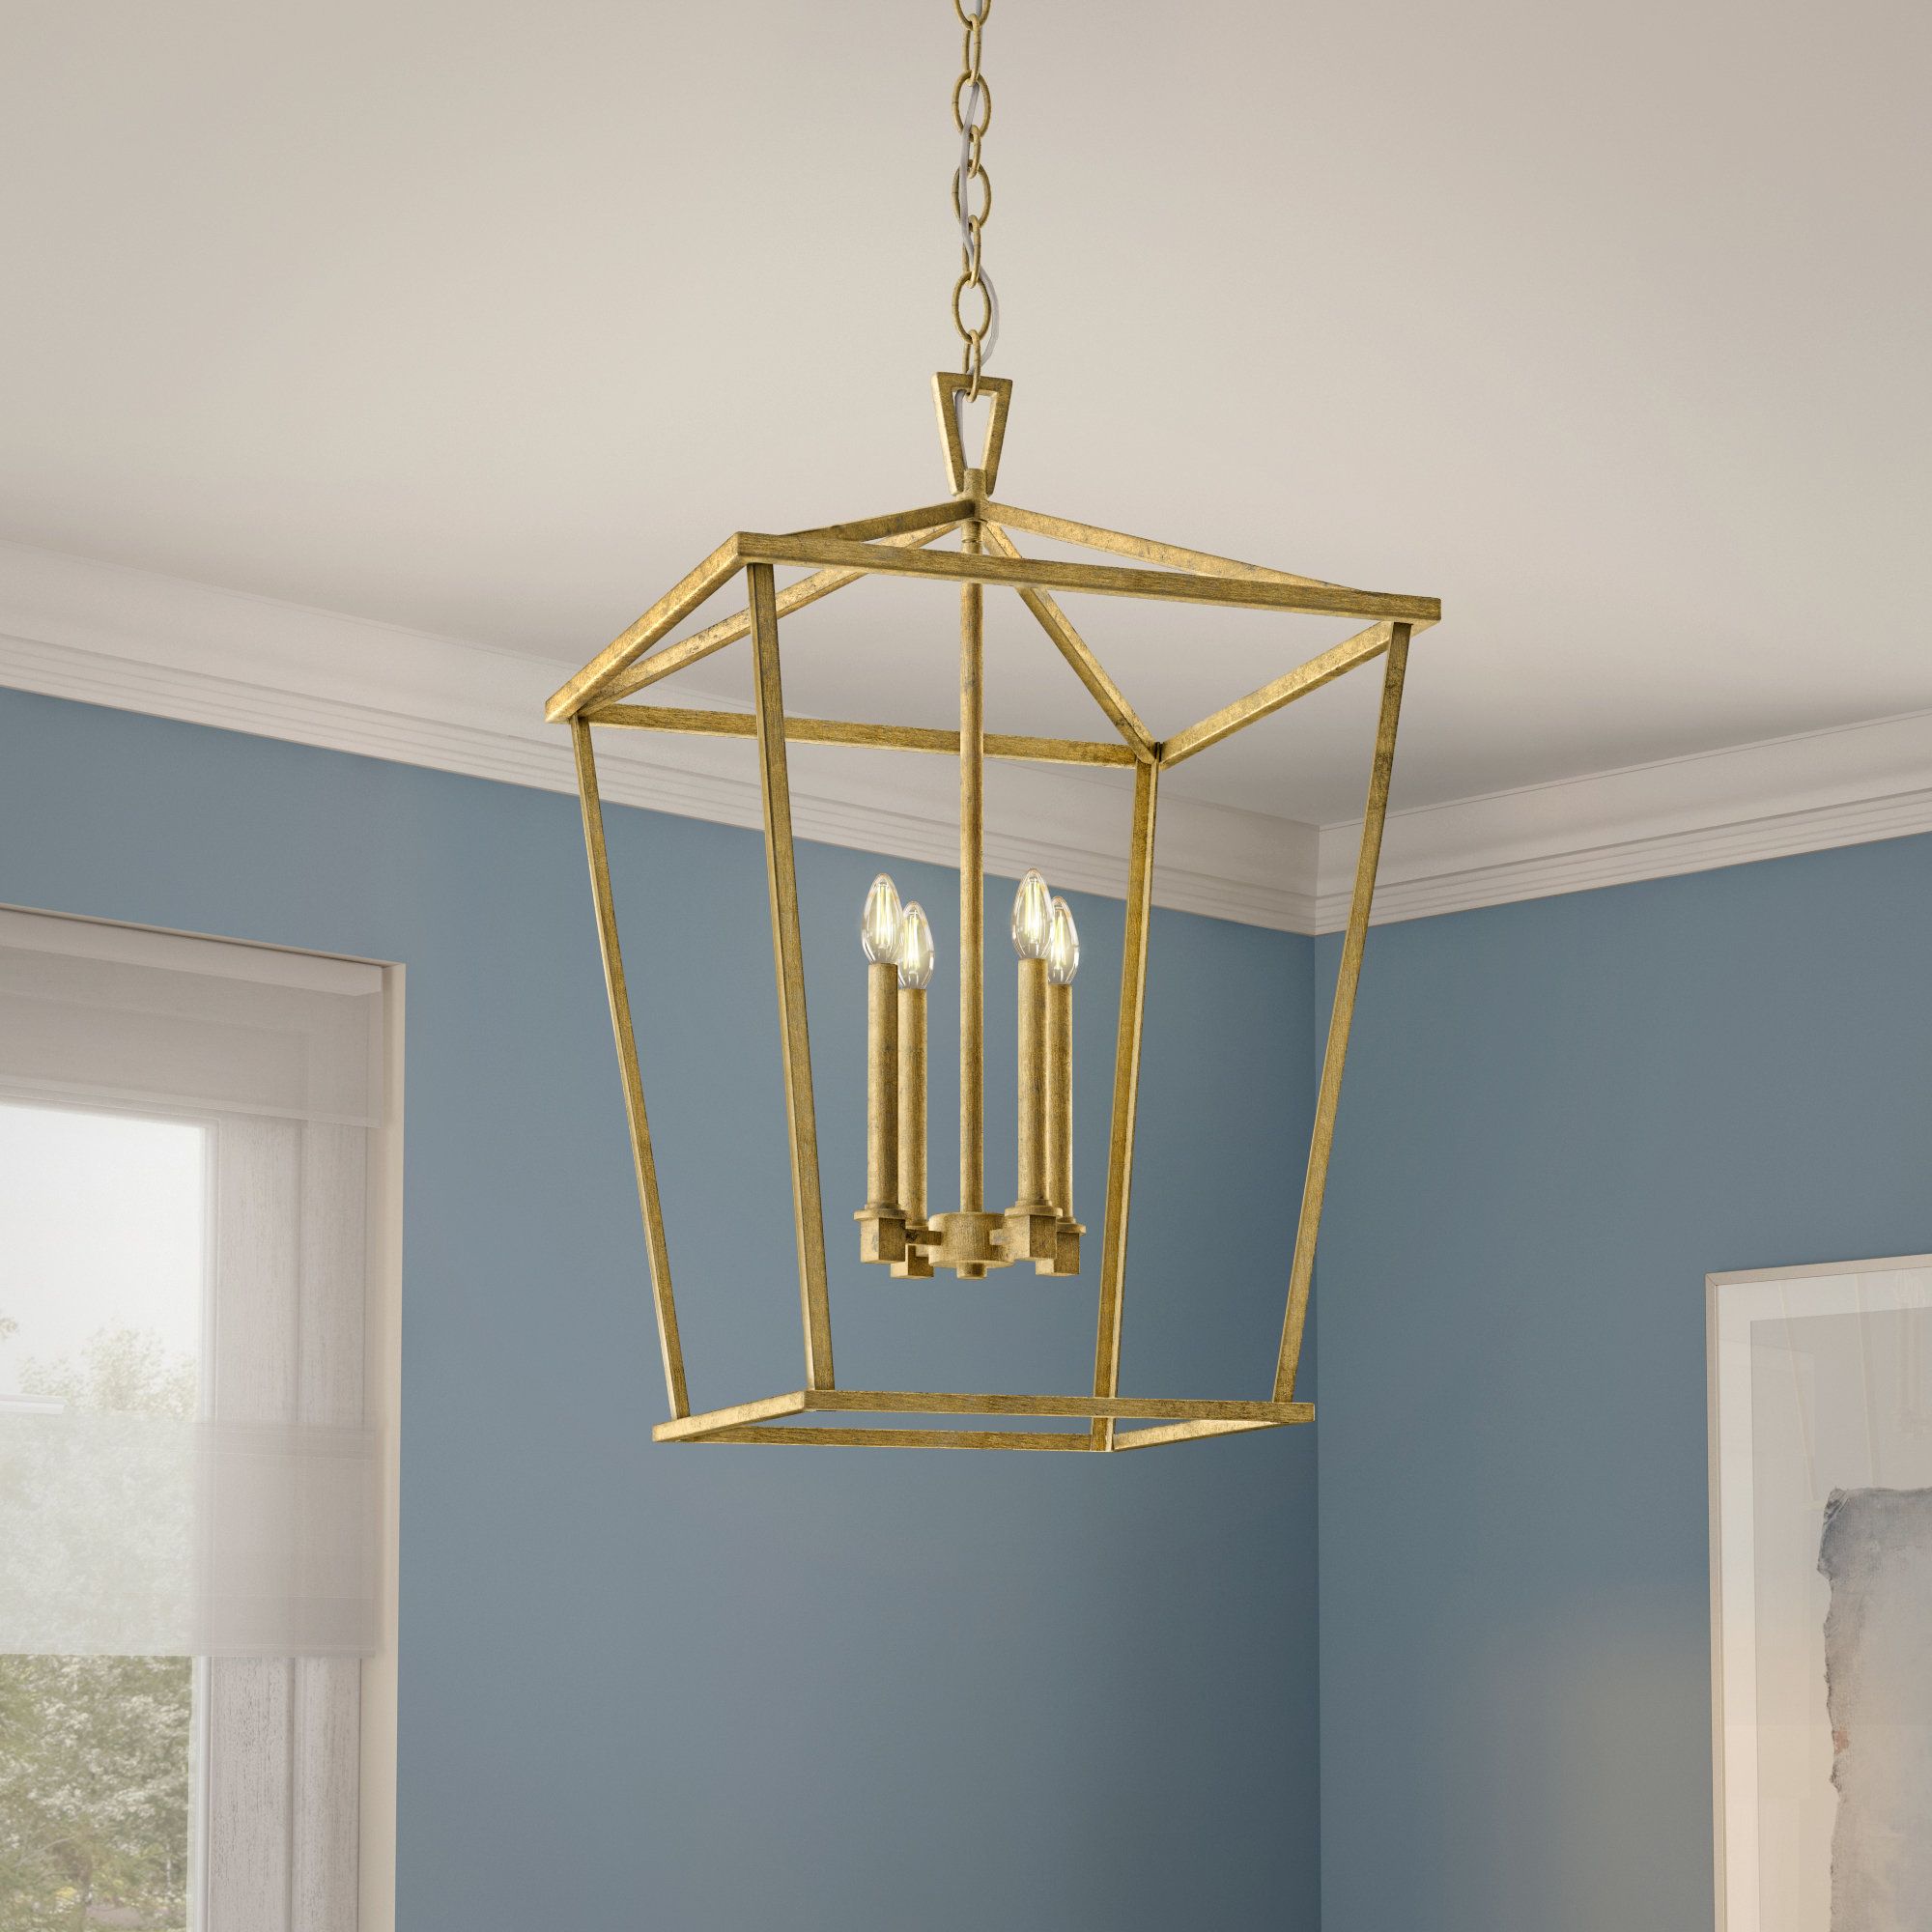 Everly Quinn Desirae 4 – Light Dimmable Lantern Geometric Chandelier &  Reviews (View 8 of 15)